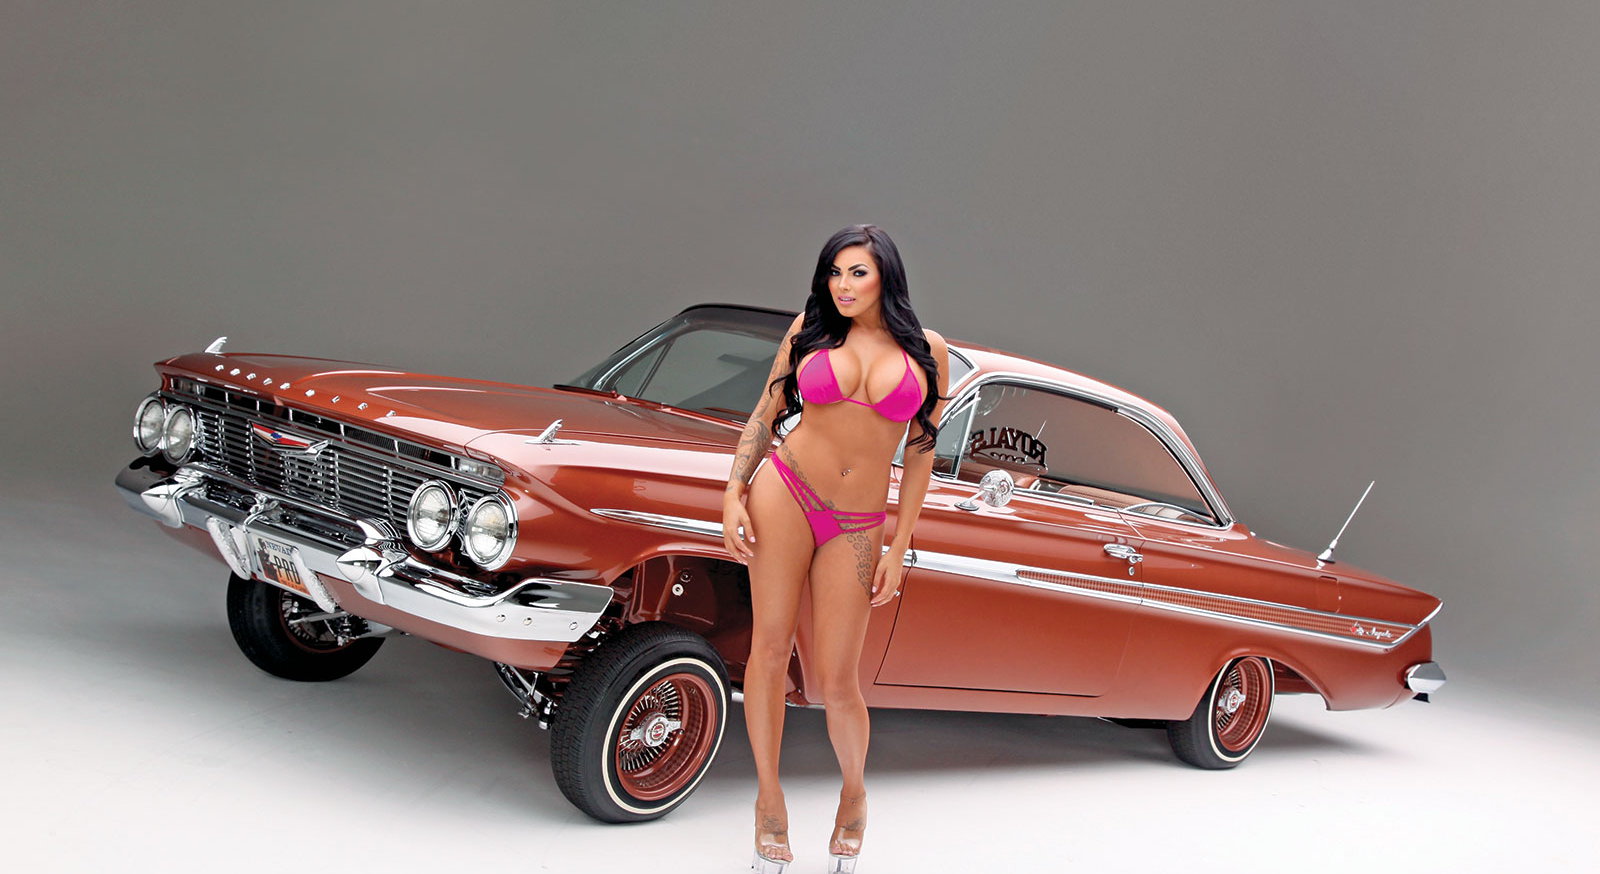 Lowrider with naked graphics